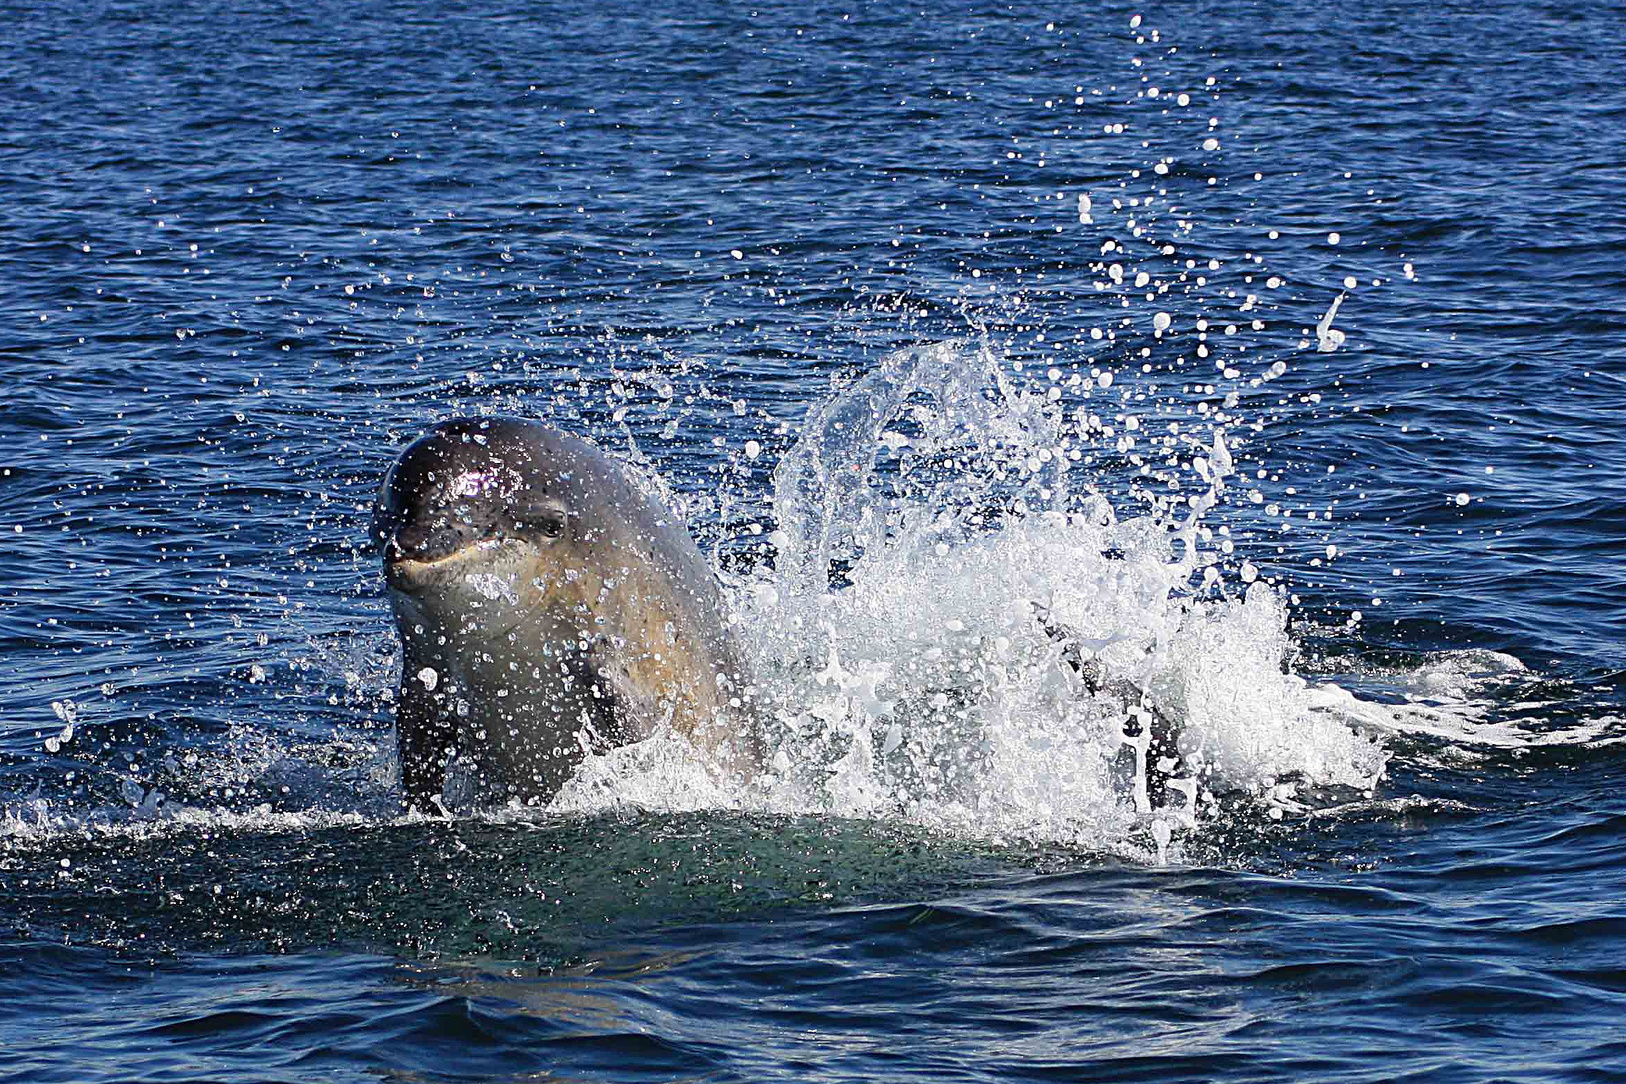 A dolphin breaches off the Moray Firth. Image by Ellis Lawrence / CC BY-SA 2.0